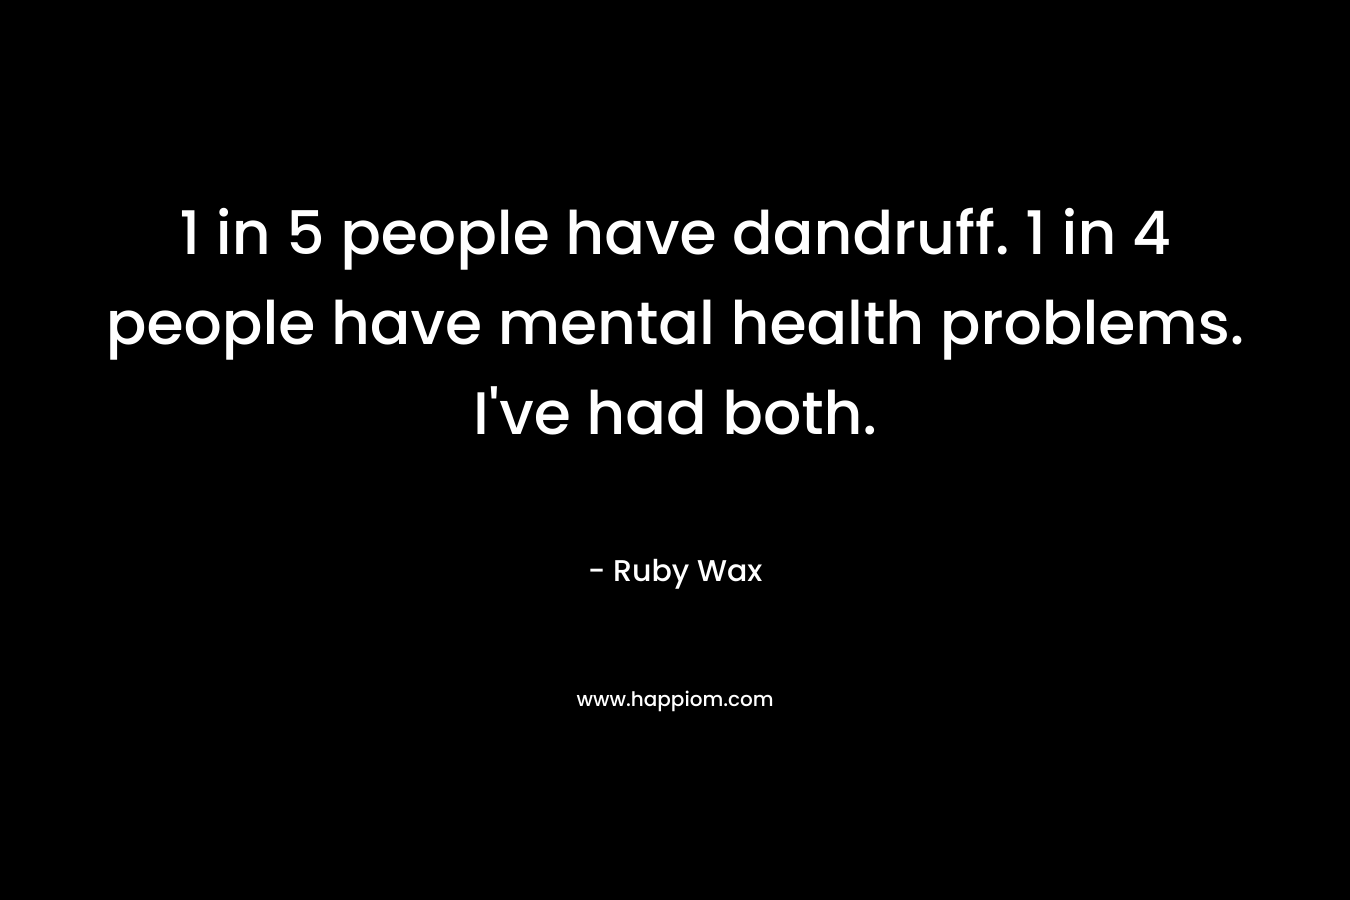 1 in 5 people have dandruff. 1 in 4 people have mental health problems. I’ve had both. – Ruby Wax